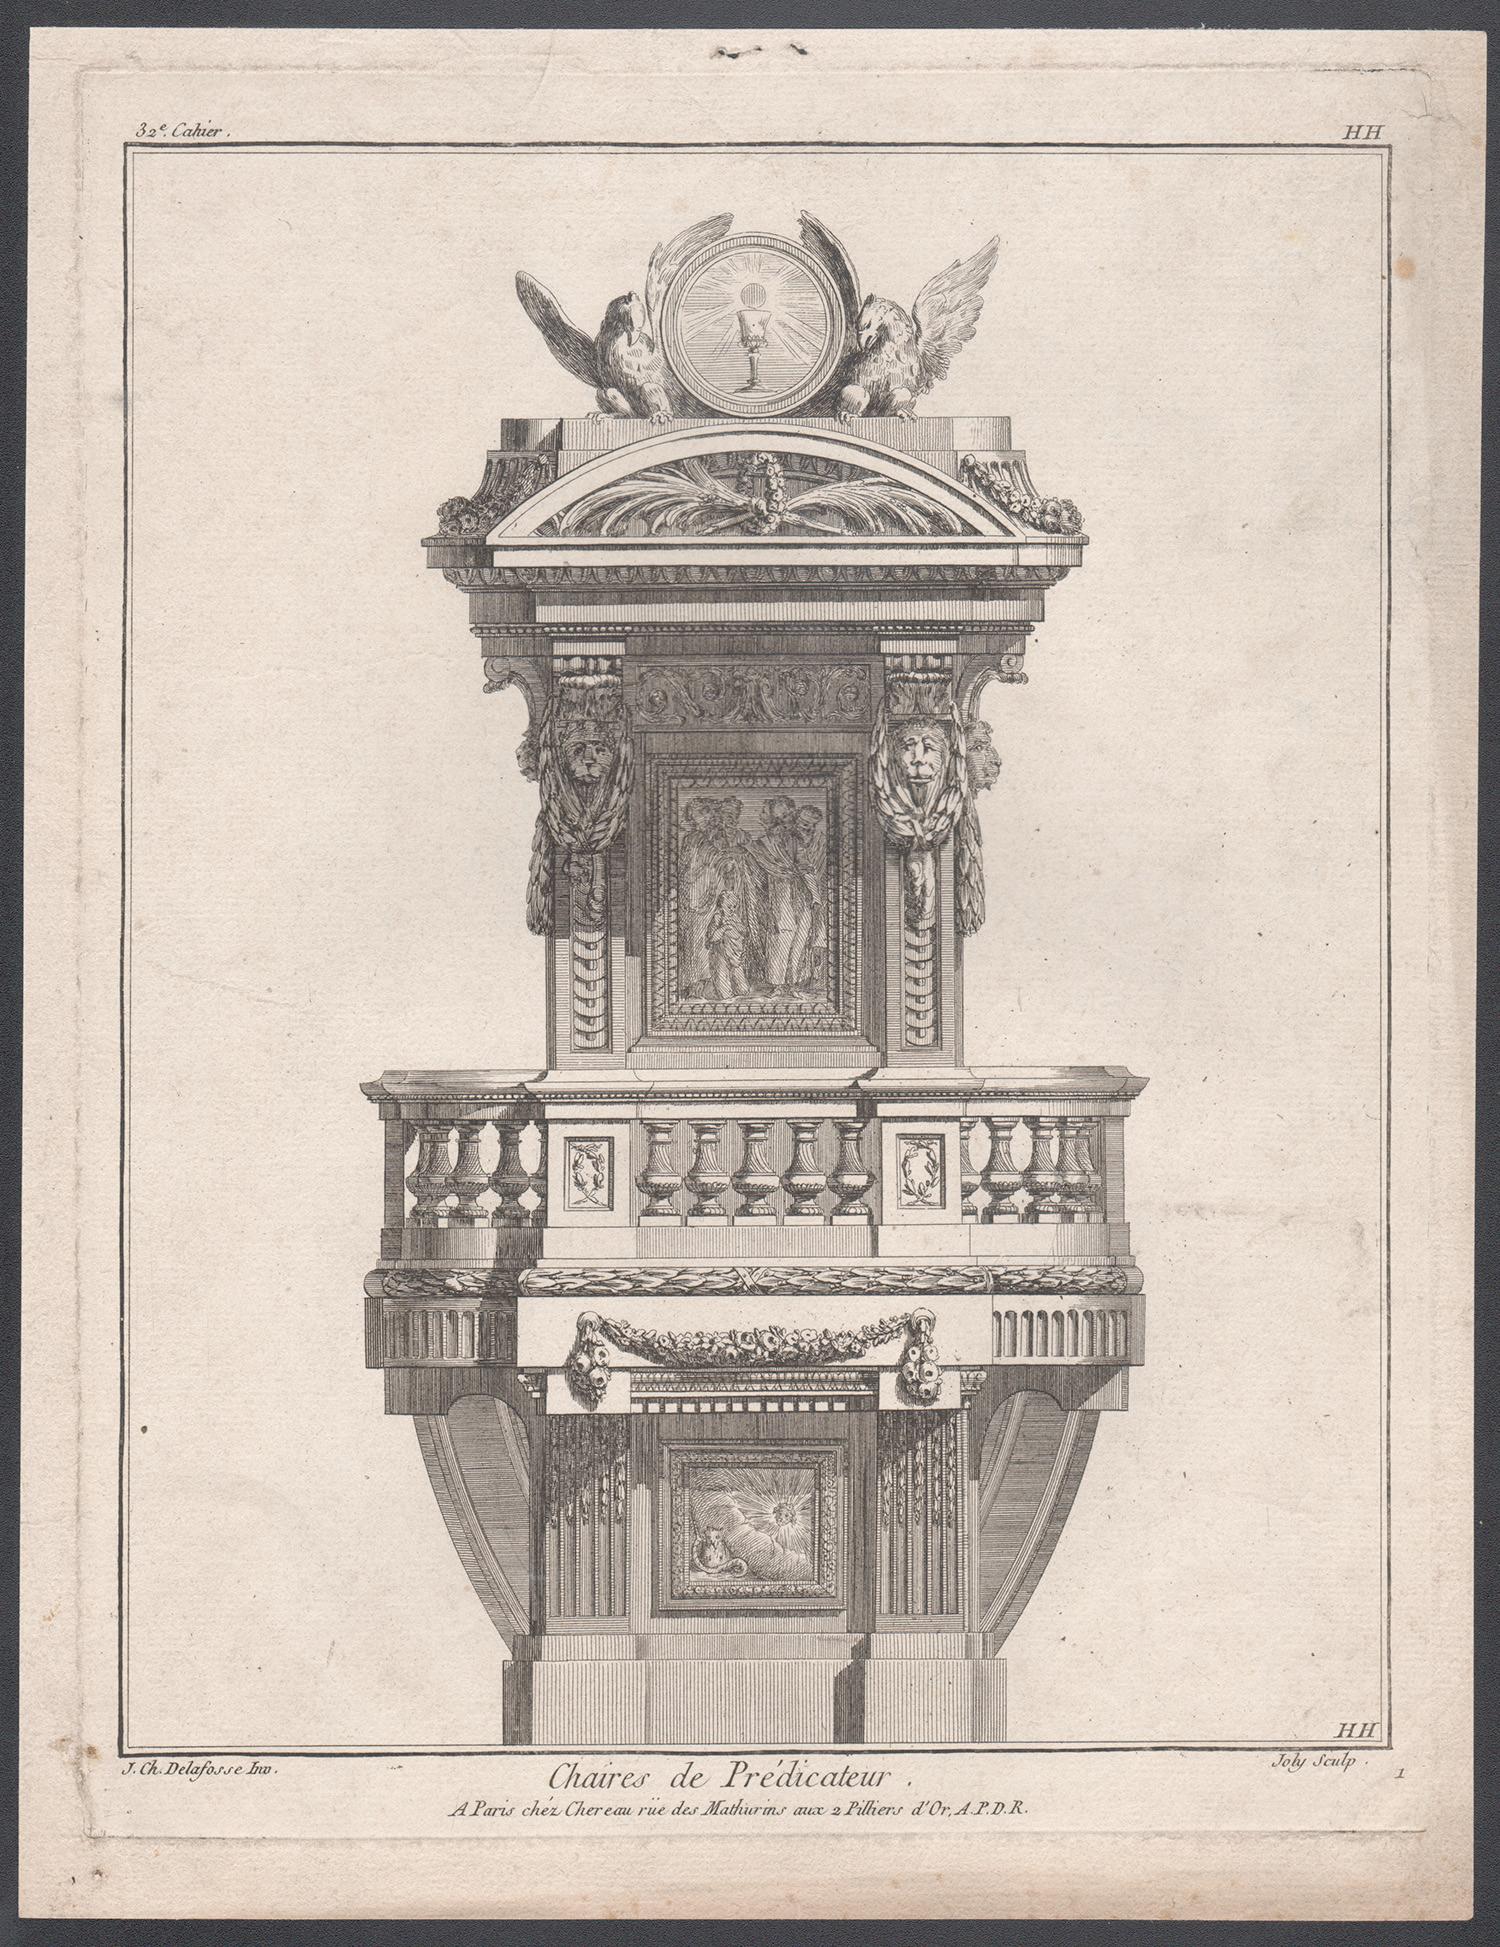 French Neoclassical design for a Pulpit, engraving after Delafosse - Print by Joly after Jean-Charles Delafosse (1734-1791)